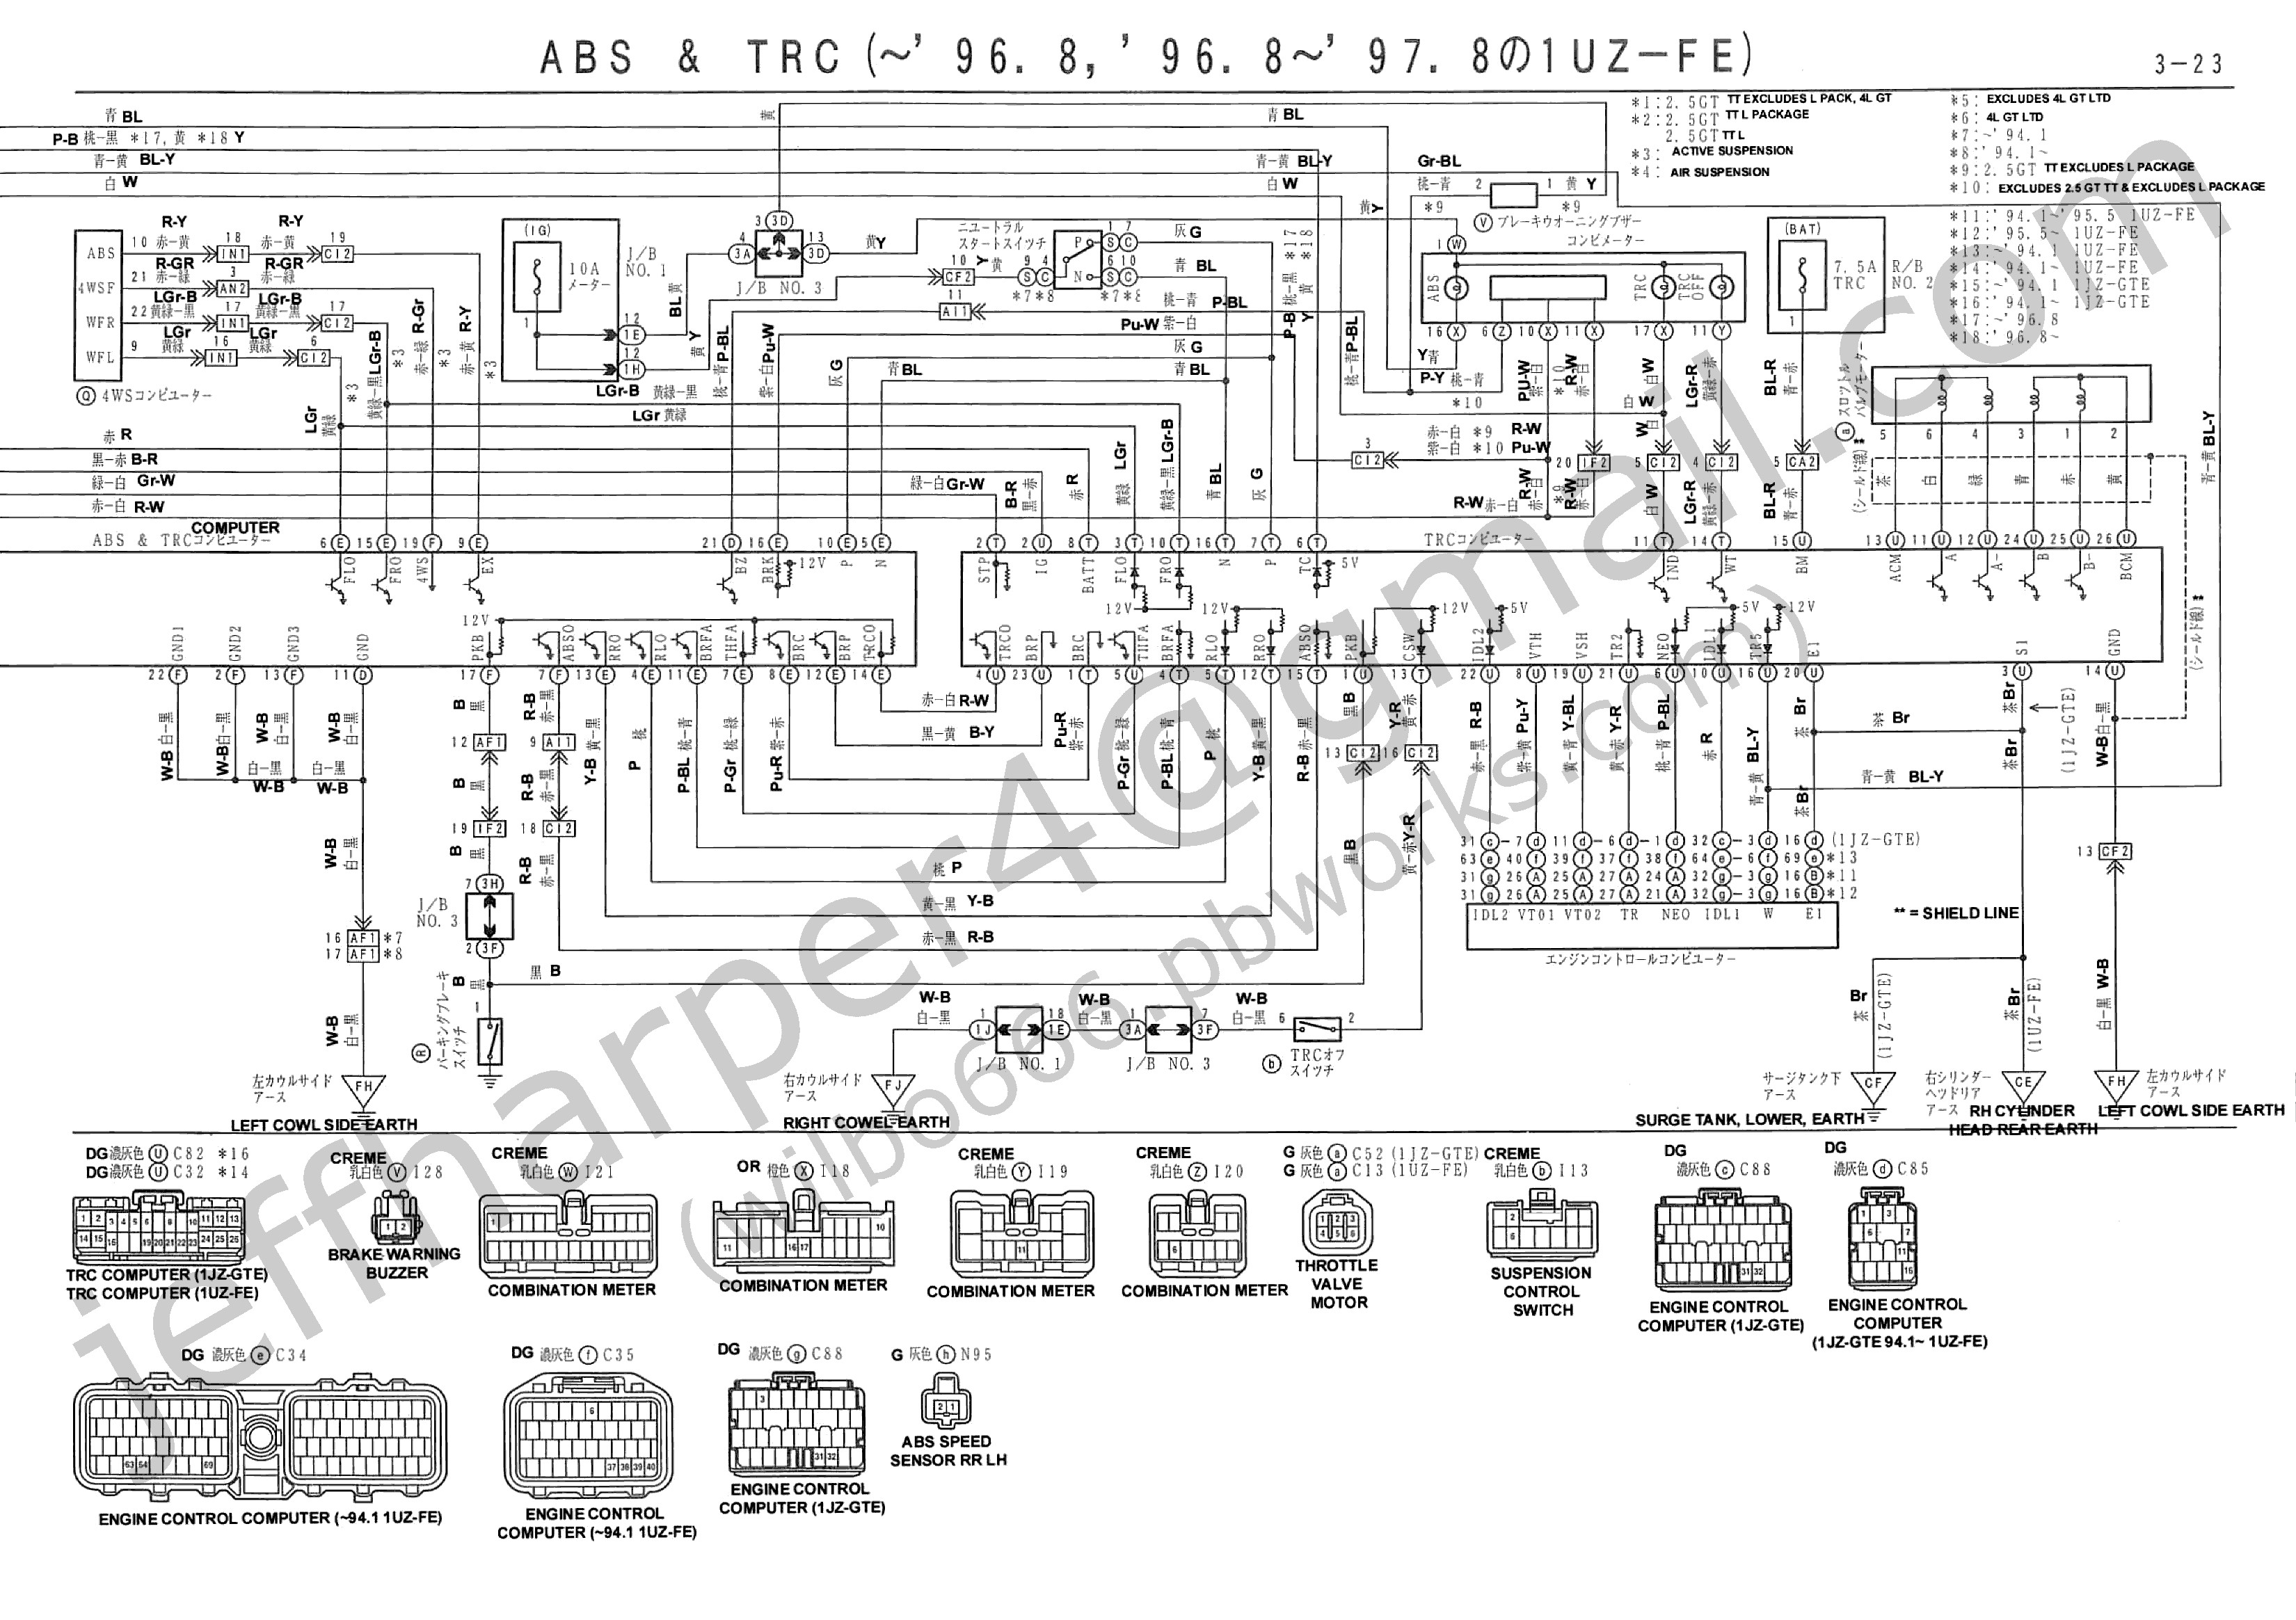 Mercedes Car Wiring Diagram Schematic Symbols Threads Free Image About Wiring Diagram and Of Mercedes Car Wiring Diagram